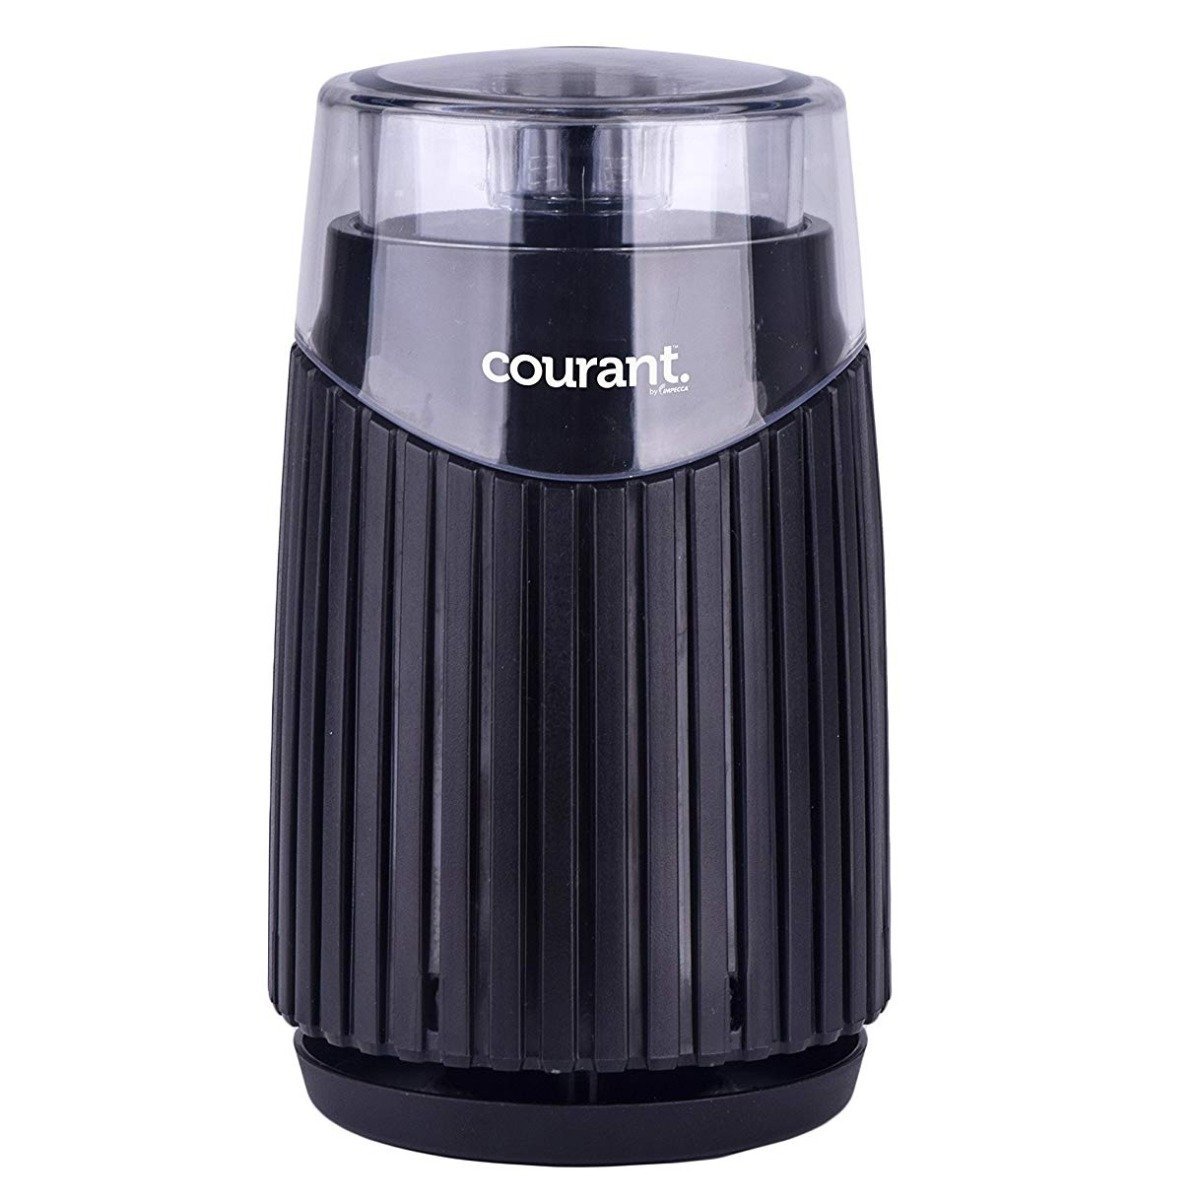 Courant Electric Motor Coffee Grinder - Assorted Colors / Black